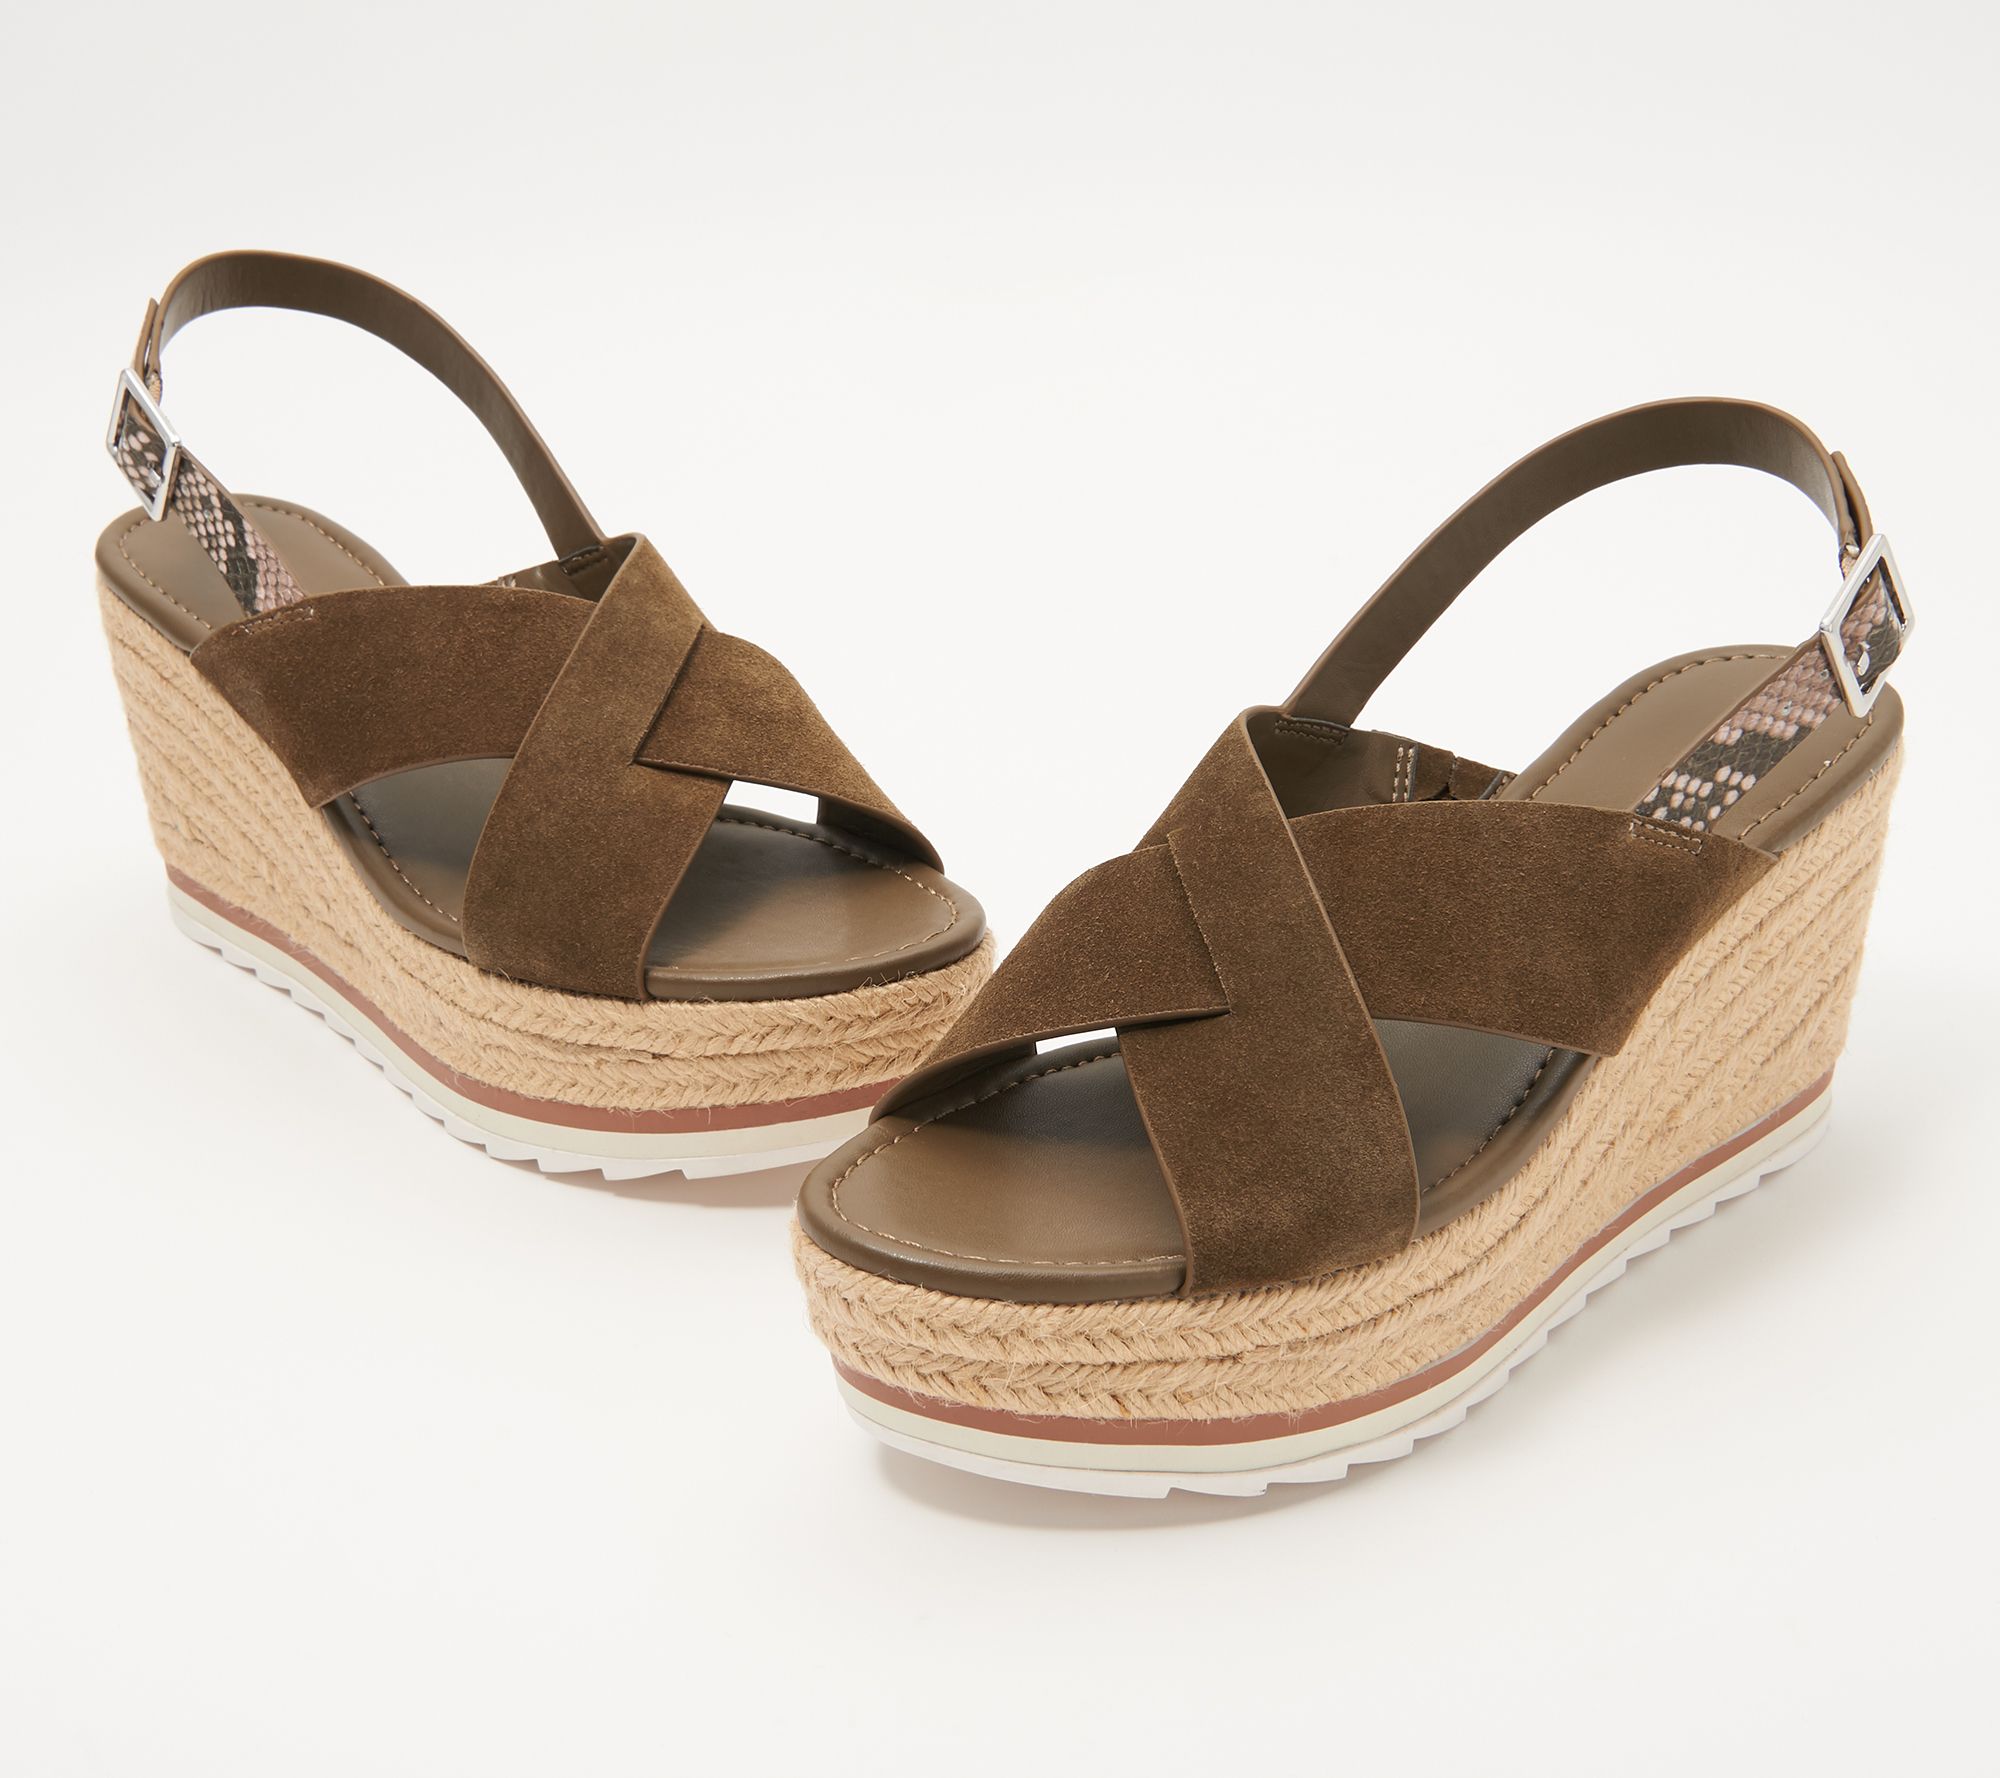 Marc Fisher Suede Cross-Strap Wedges - Zevra - QVC.com